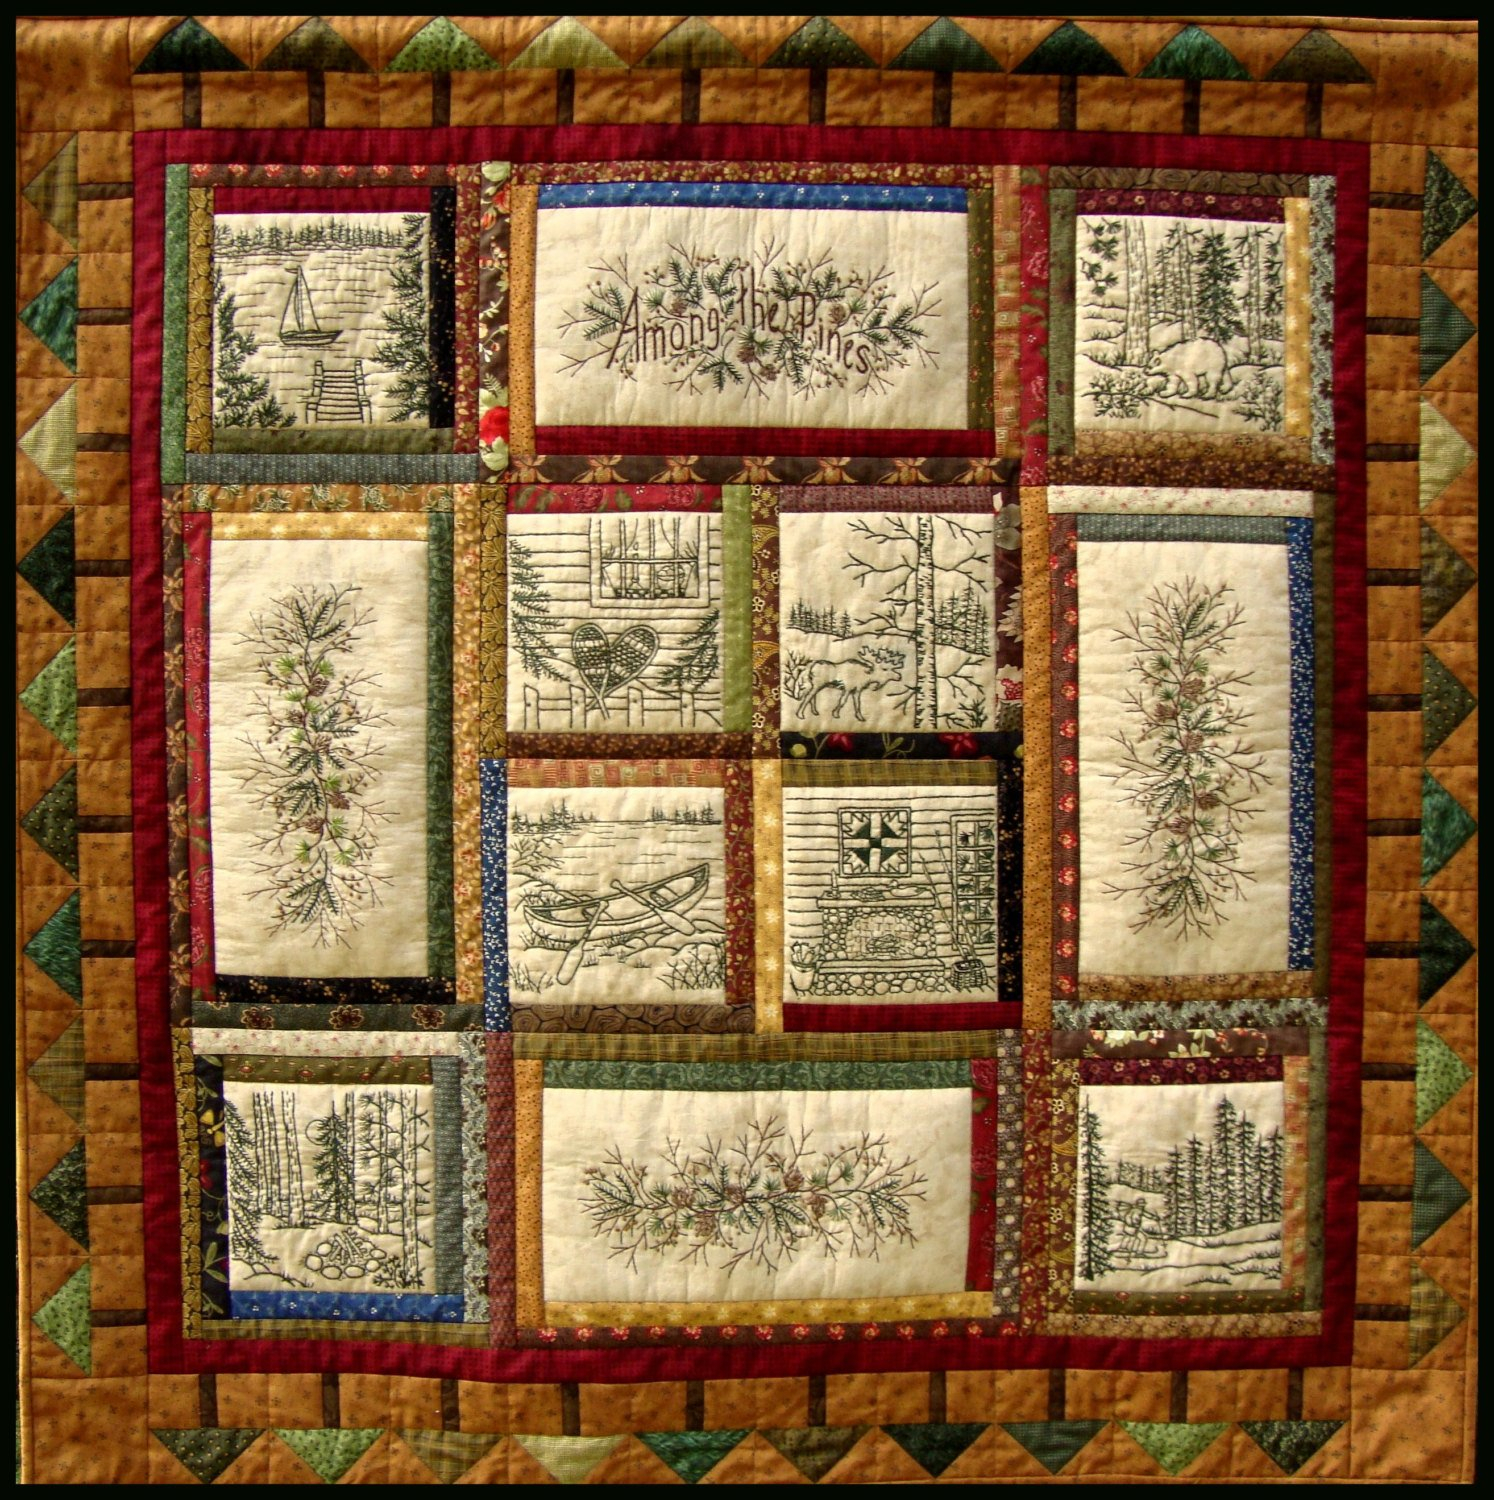 Hand Embroidery Patterns For Quilts Among The Pines Wellington Designs